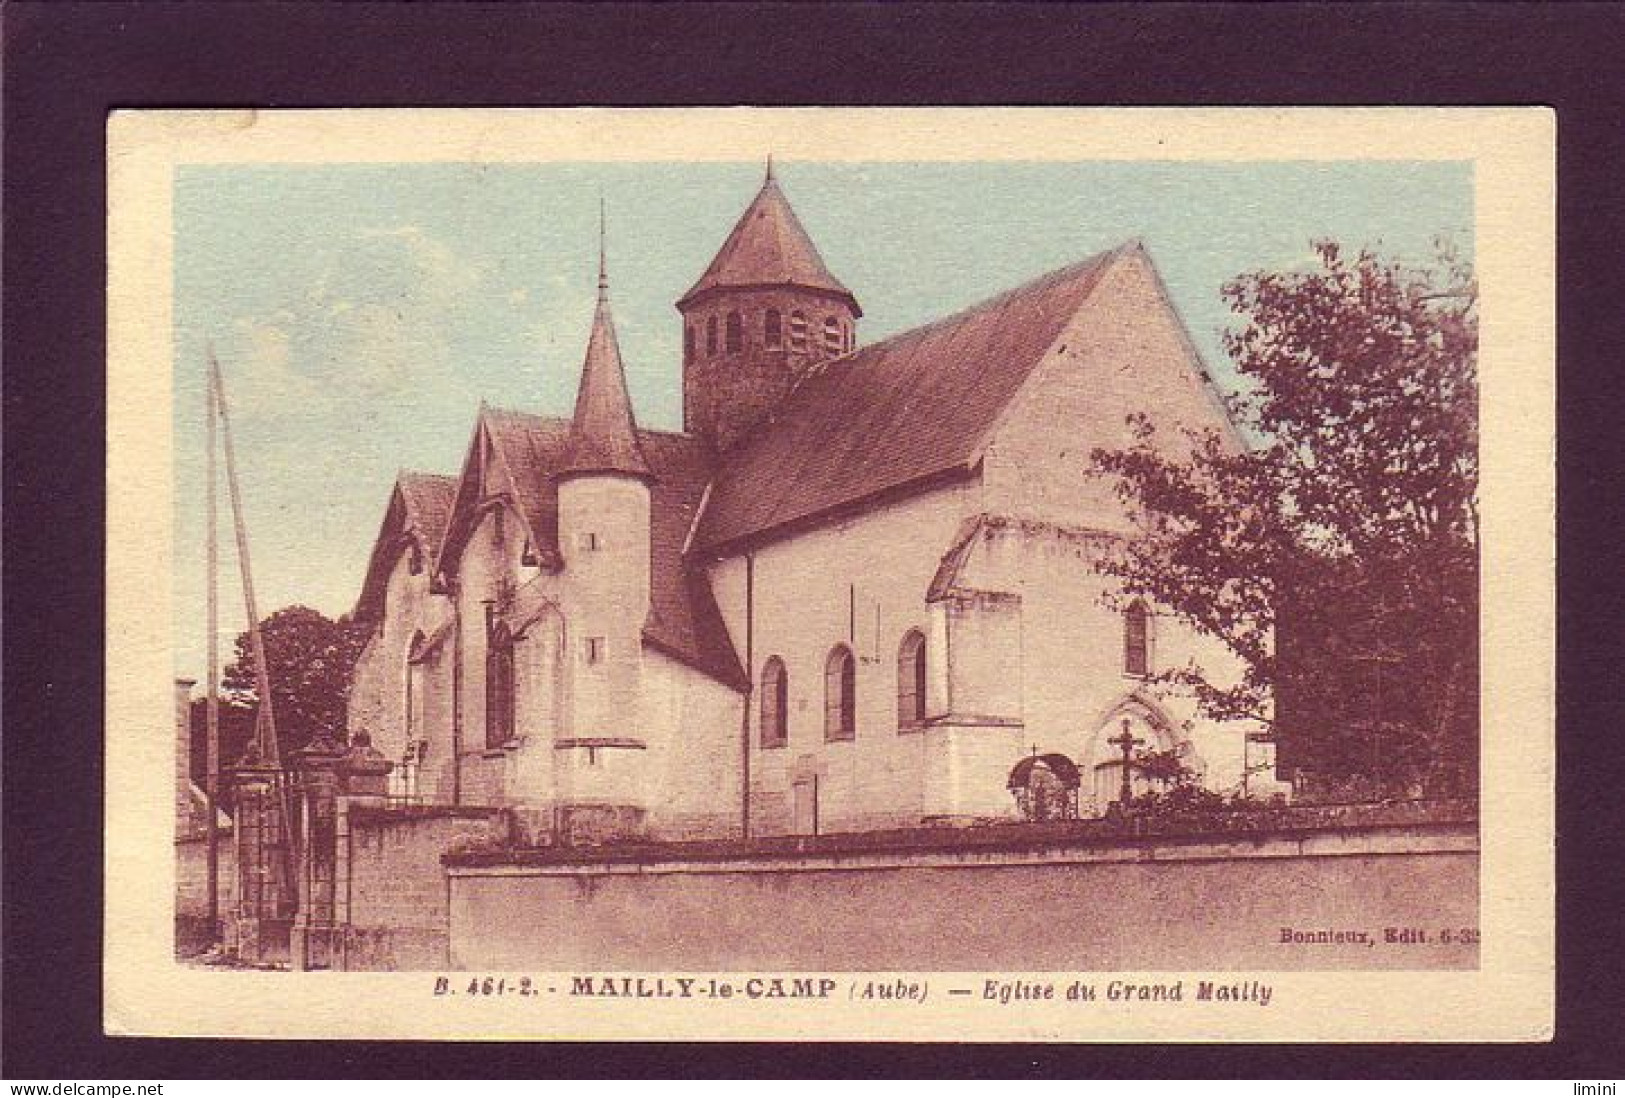 10 - MAILLY-le-CAMP - ÉGLISE DU GRAND MAILLY - COLORISÉE -  - Mailly-le-Camp